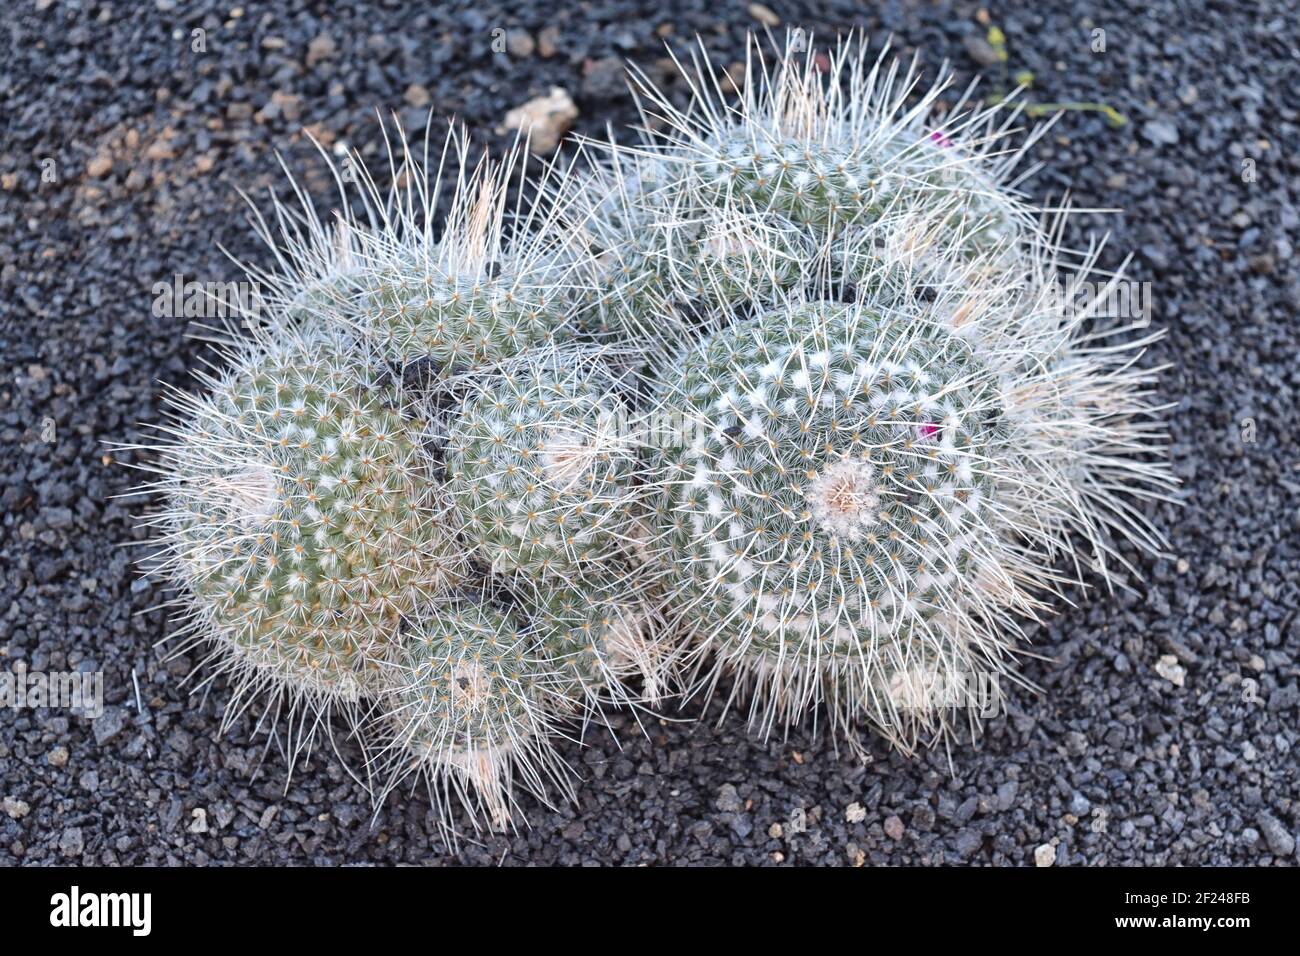 Native to central Mexico.The cristata form is a result of damage to the plant when it is young. Stock Photo